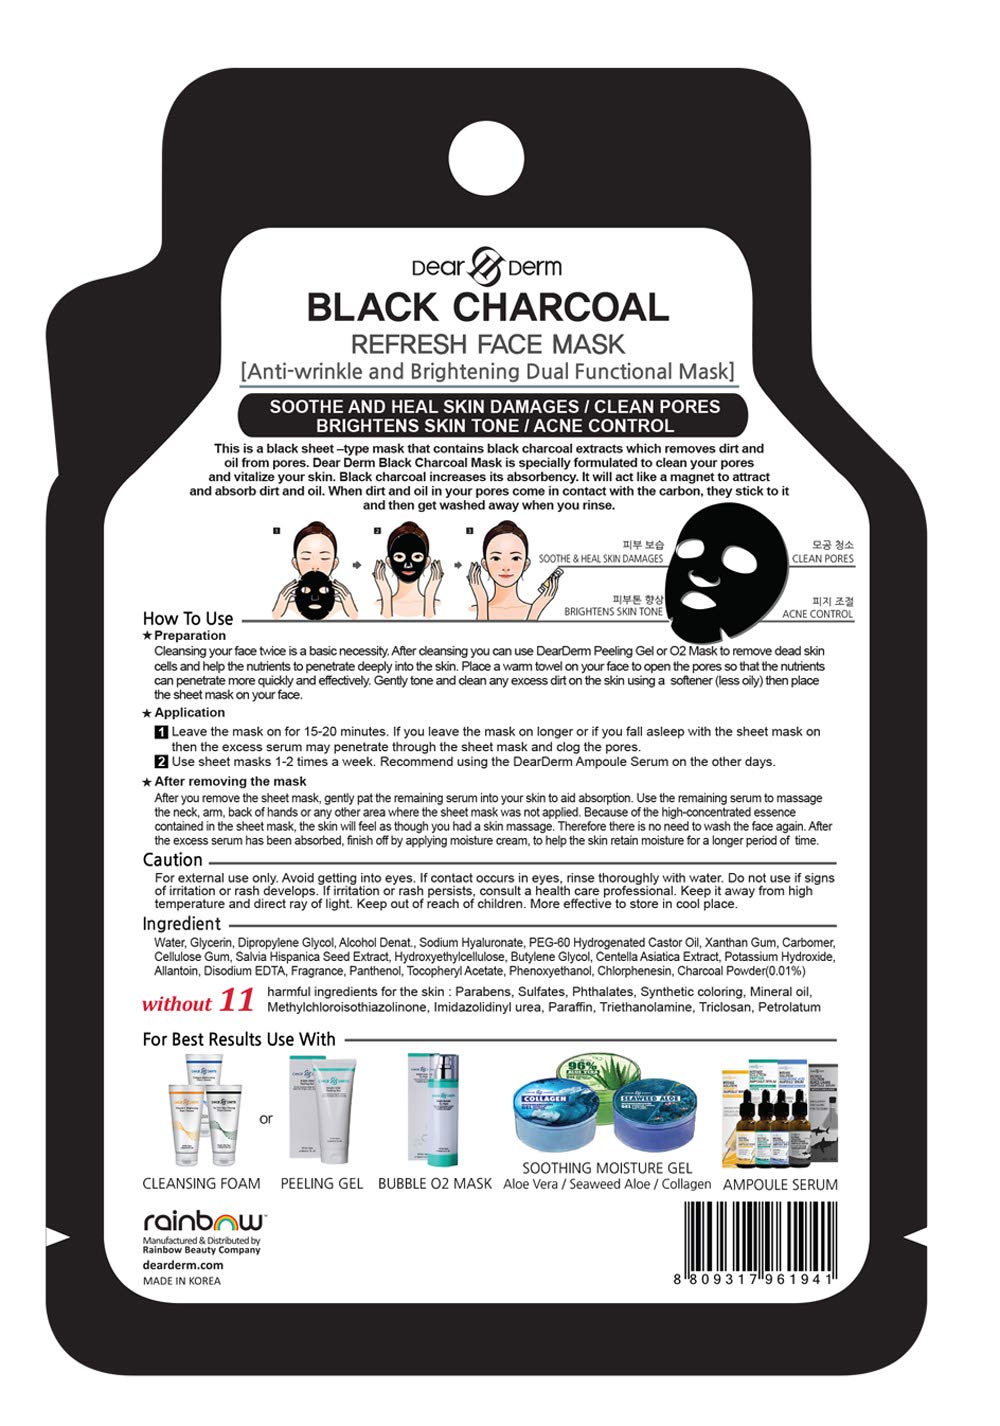 Black Charcoal Purifying Face Mask